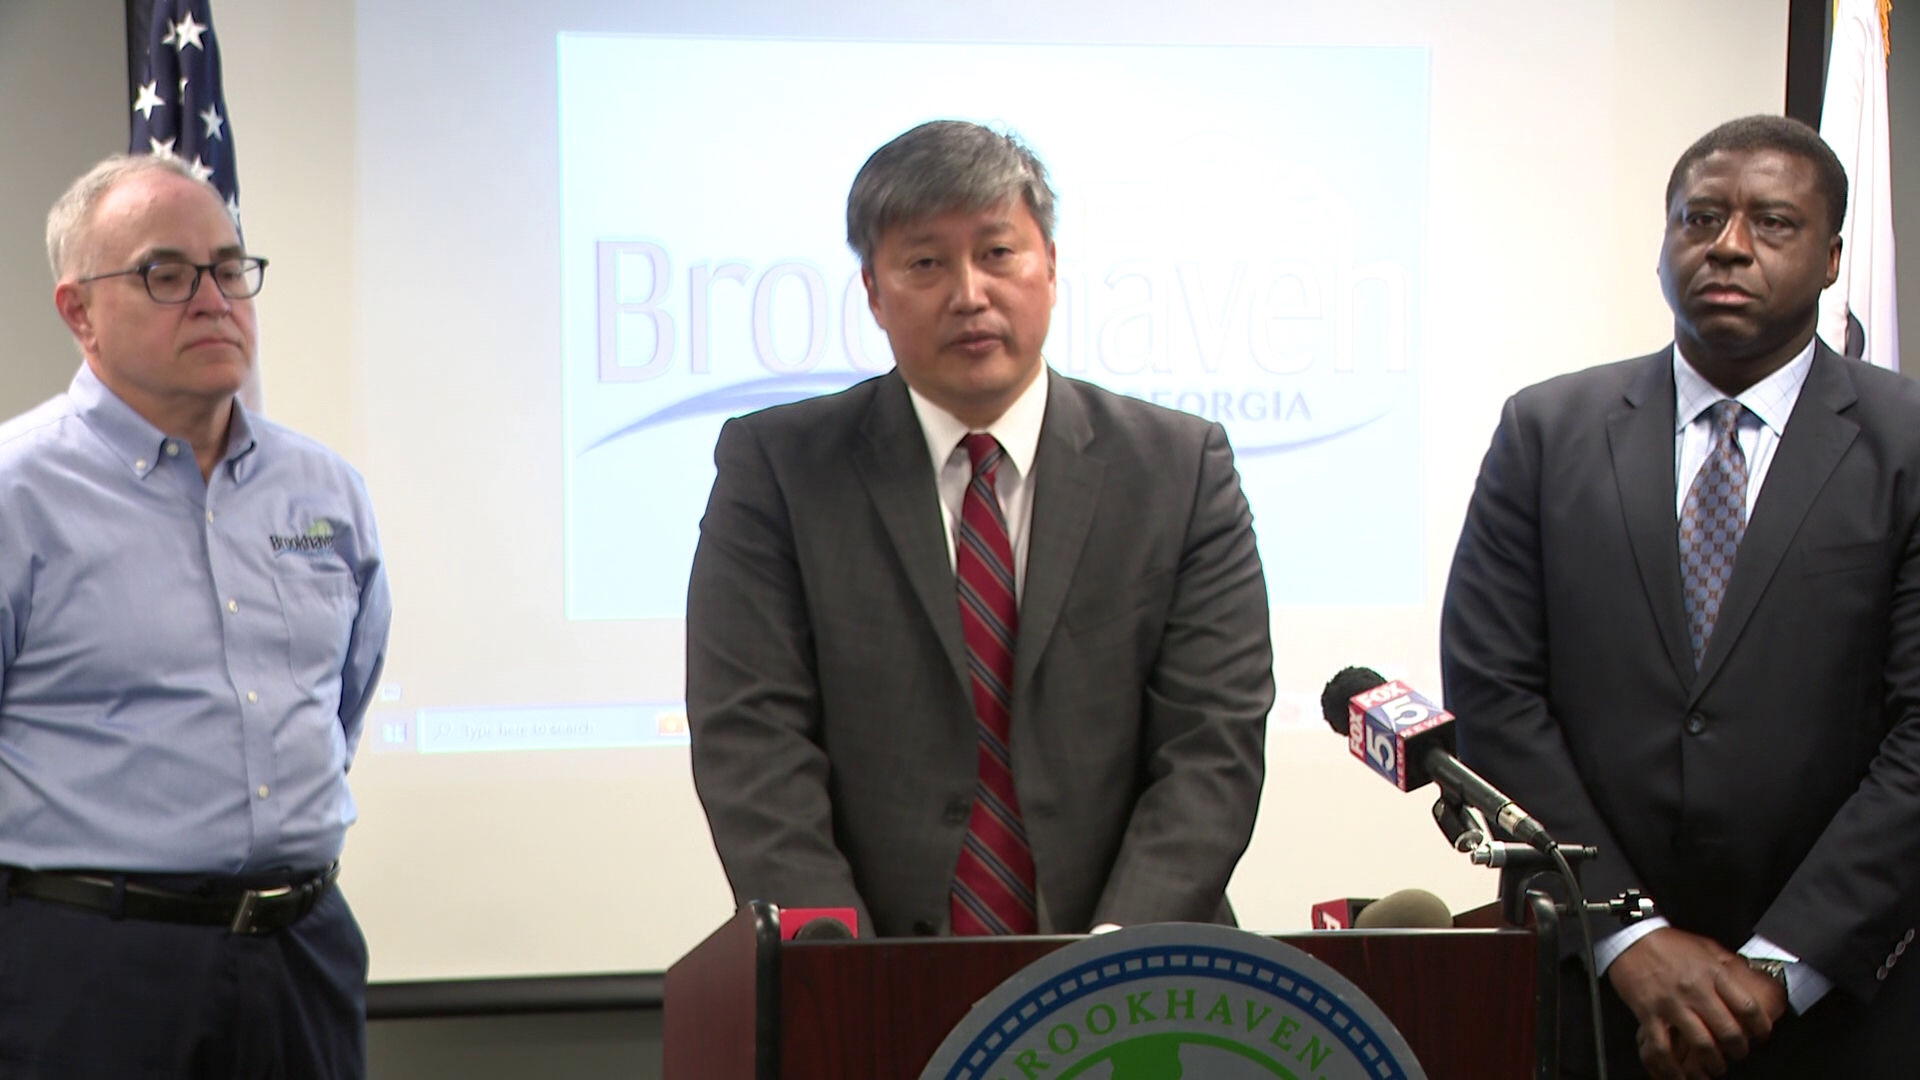 "This is literally a problem that has life-or-death consequences," said Brookhaven Mayor John Park.